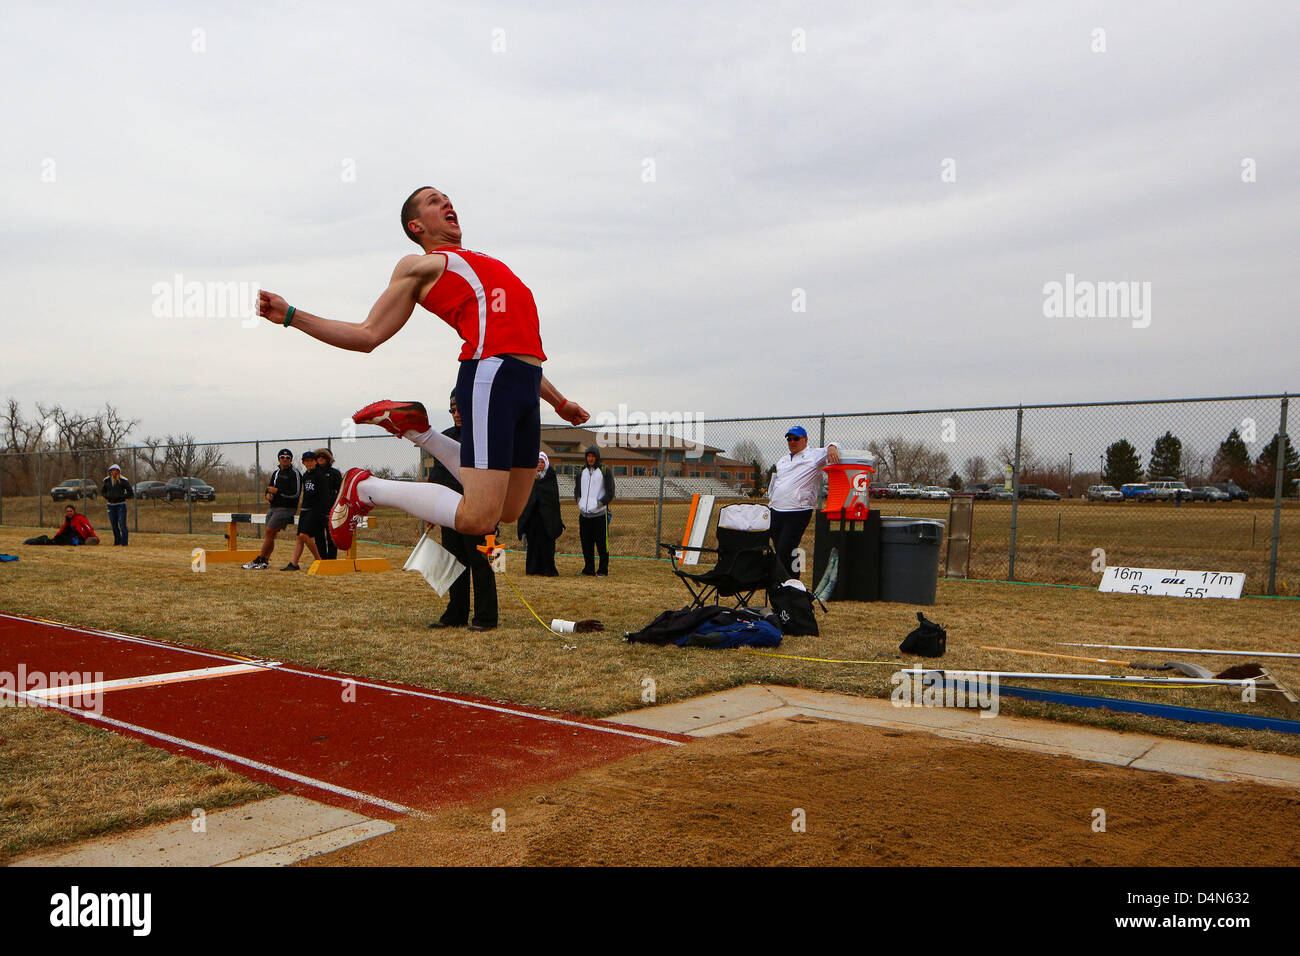 March 16, 2013 - Boulder, CO, United States of America - March 16, 2013: Michael Zeller of Metropolitan State competes in the long jump at the inaugural Jerry Quiller Classic at the University of Colorado campus in Boulder. Stock Photo